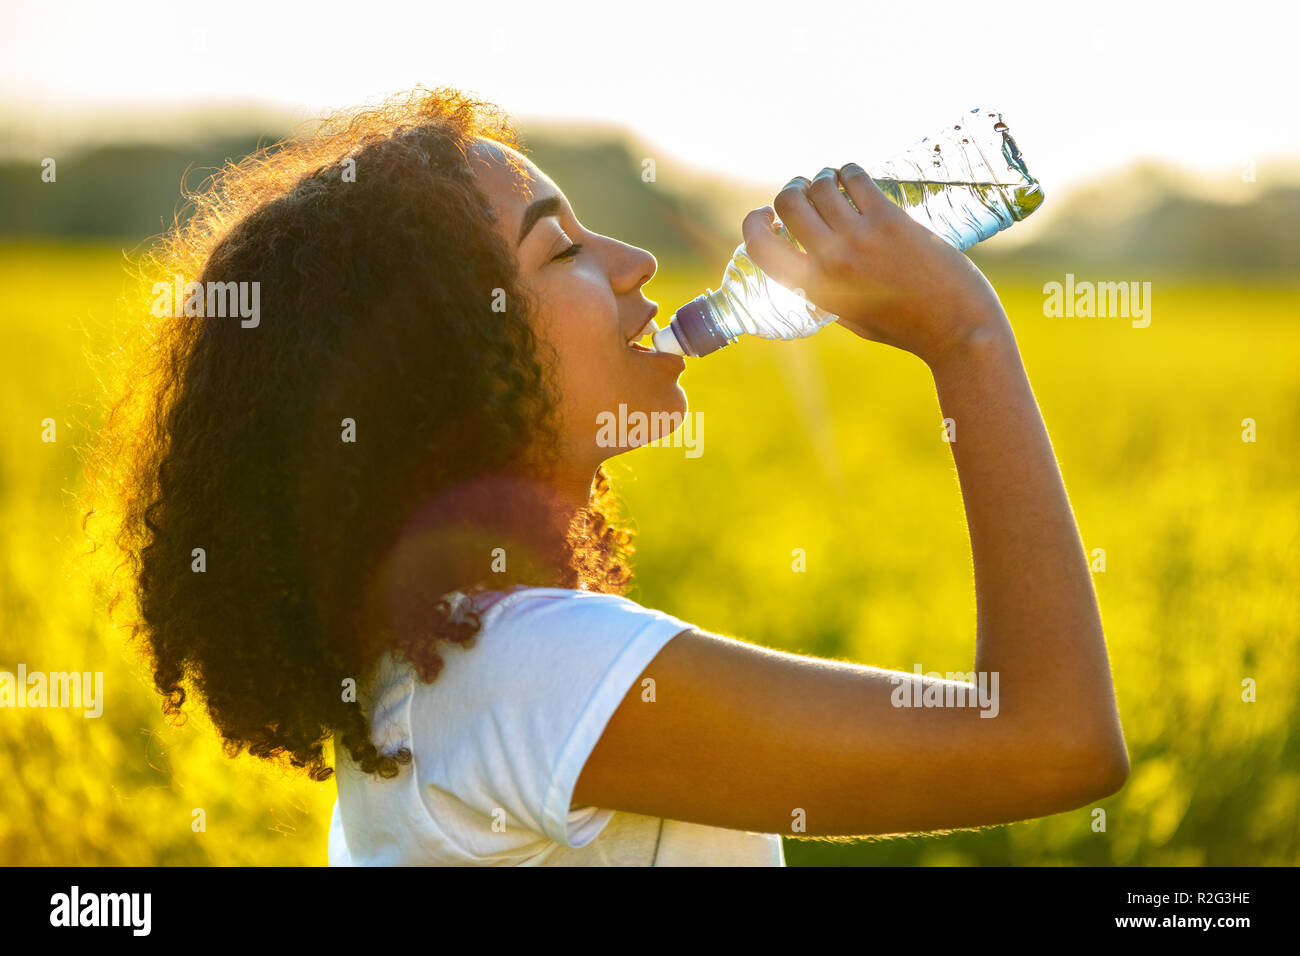 Outdoor portrait of beautiful happy mixed race African American girl teenager female young woman drinking water from a bottle in a field of yellow flo Stock Photo